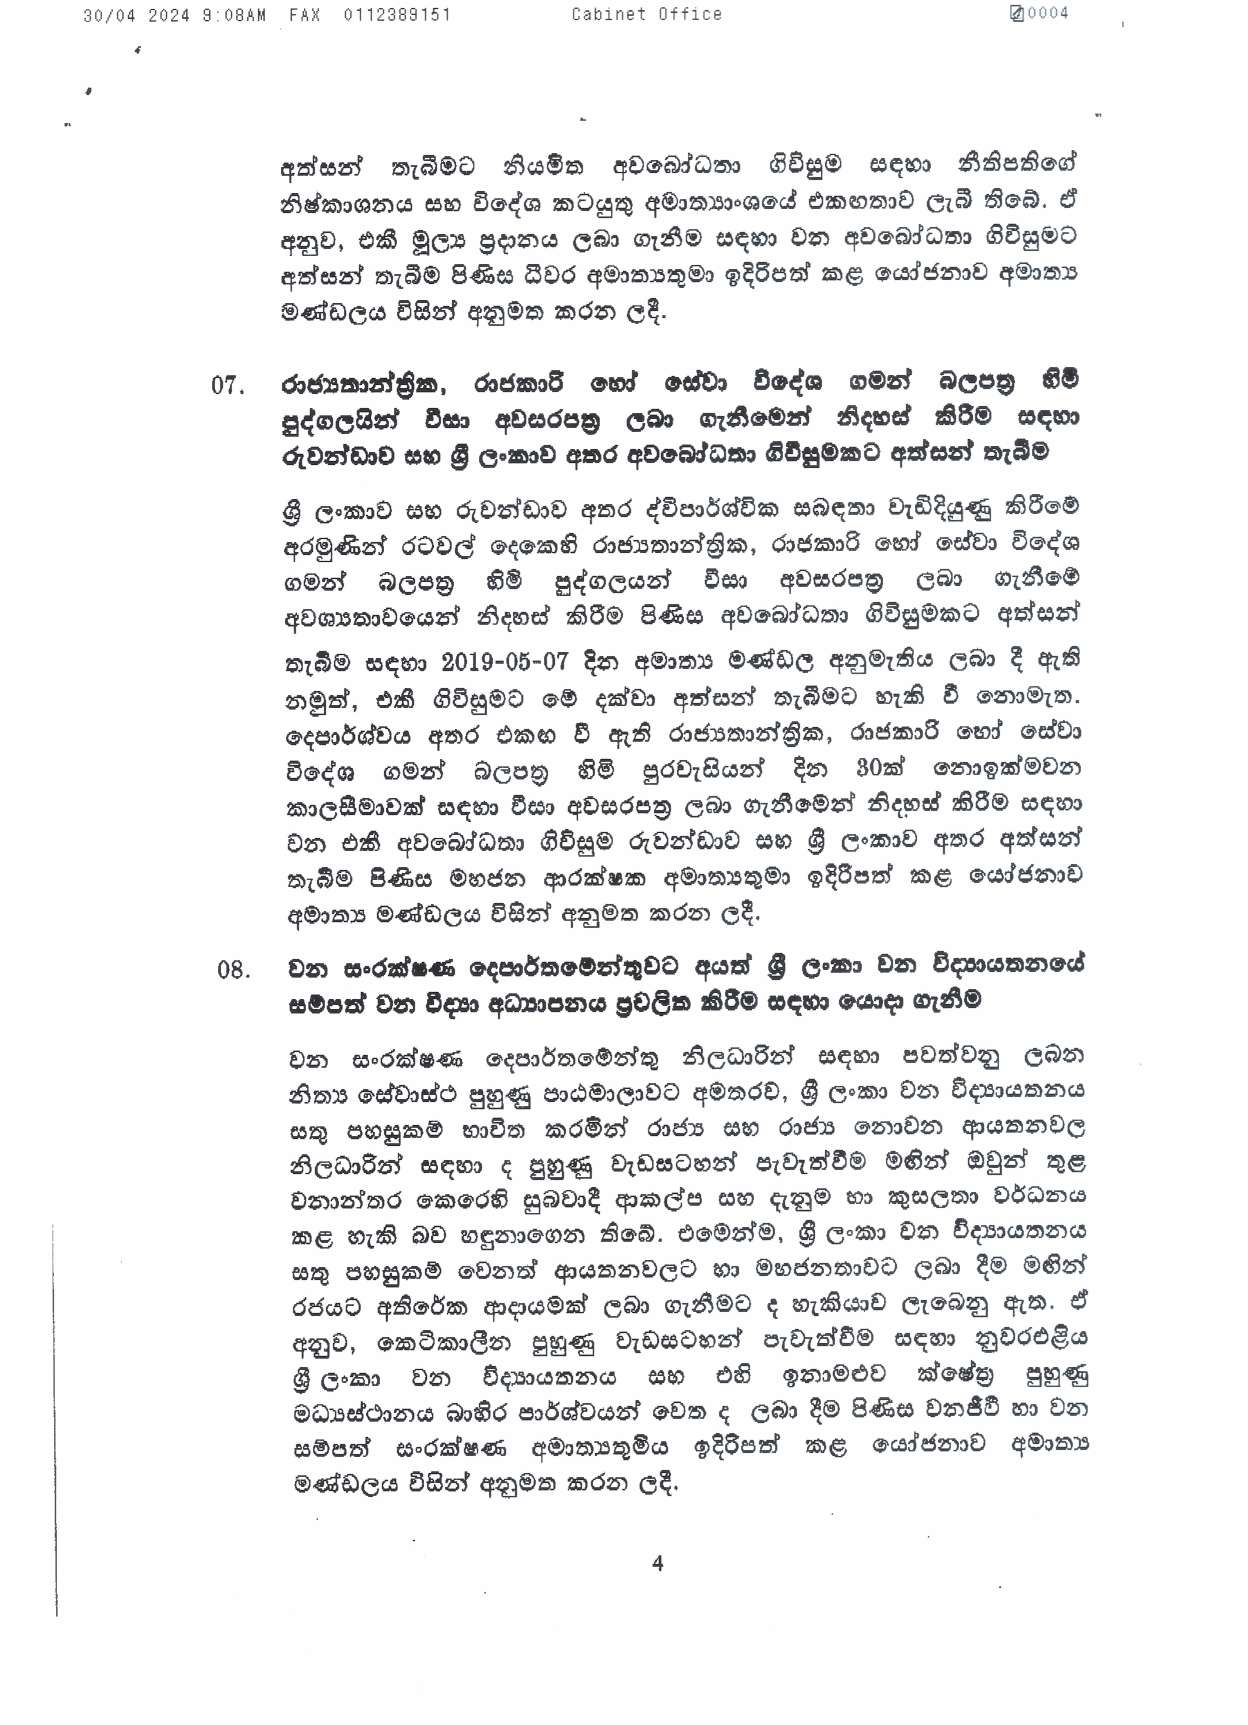 Cabinet Decision on 29.04.2024 page 0004